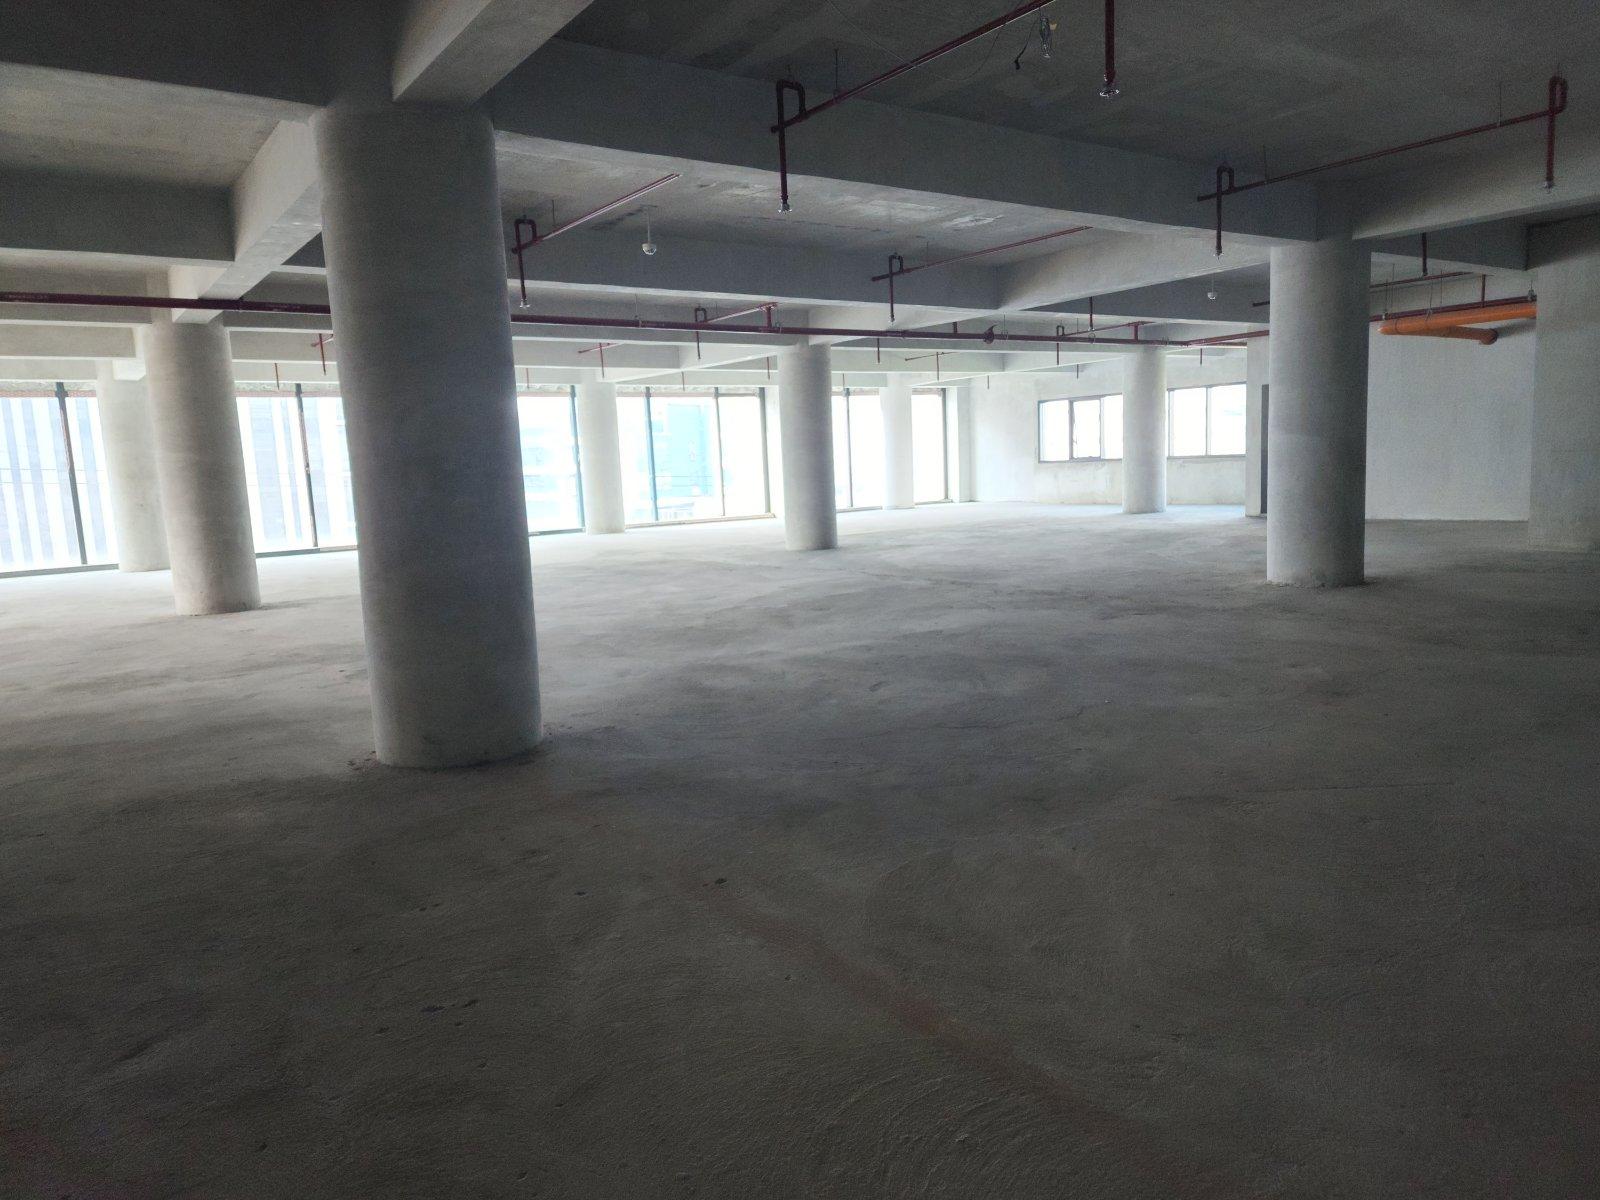 Office Space Rent Lease Alabang Muntinlupa Manila Philippines 1000 sqm